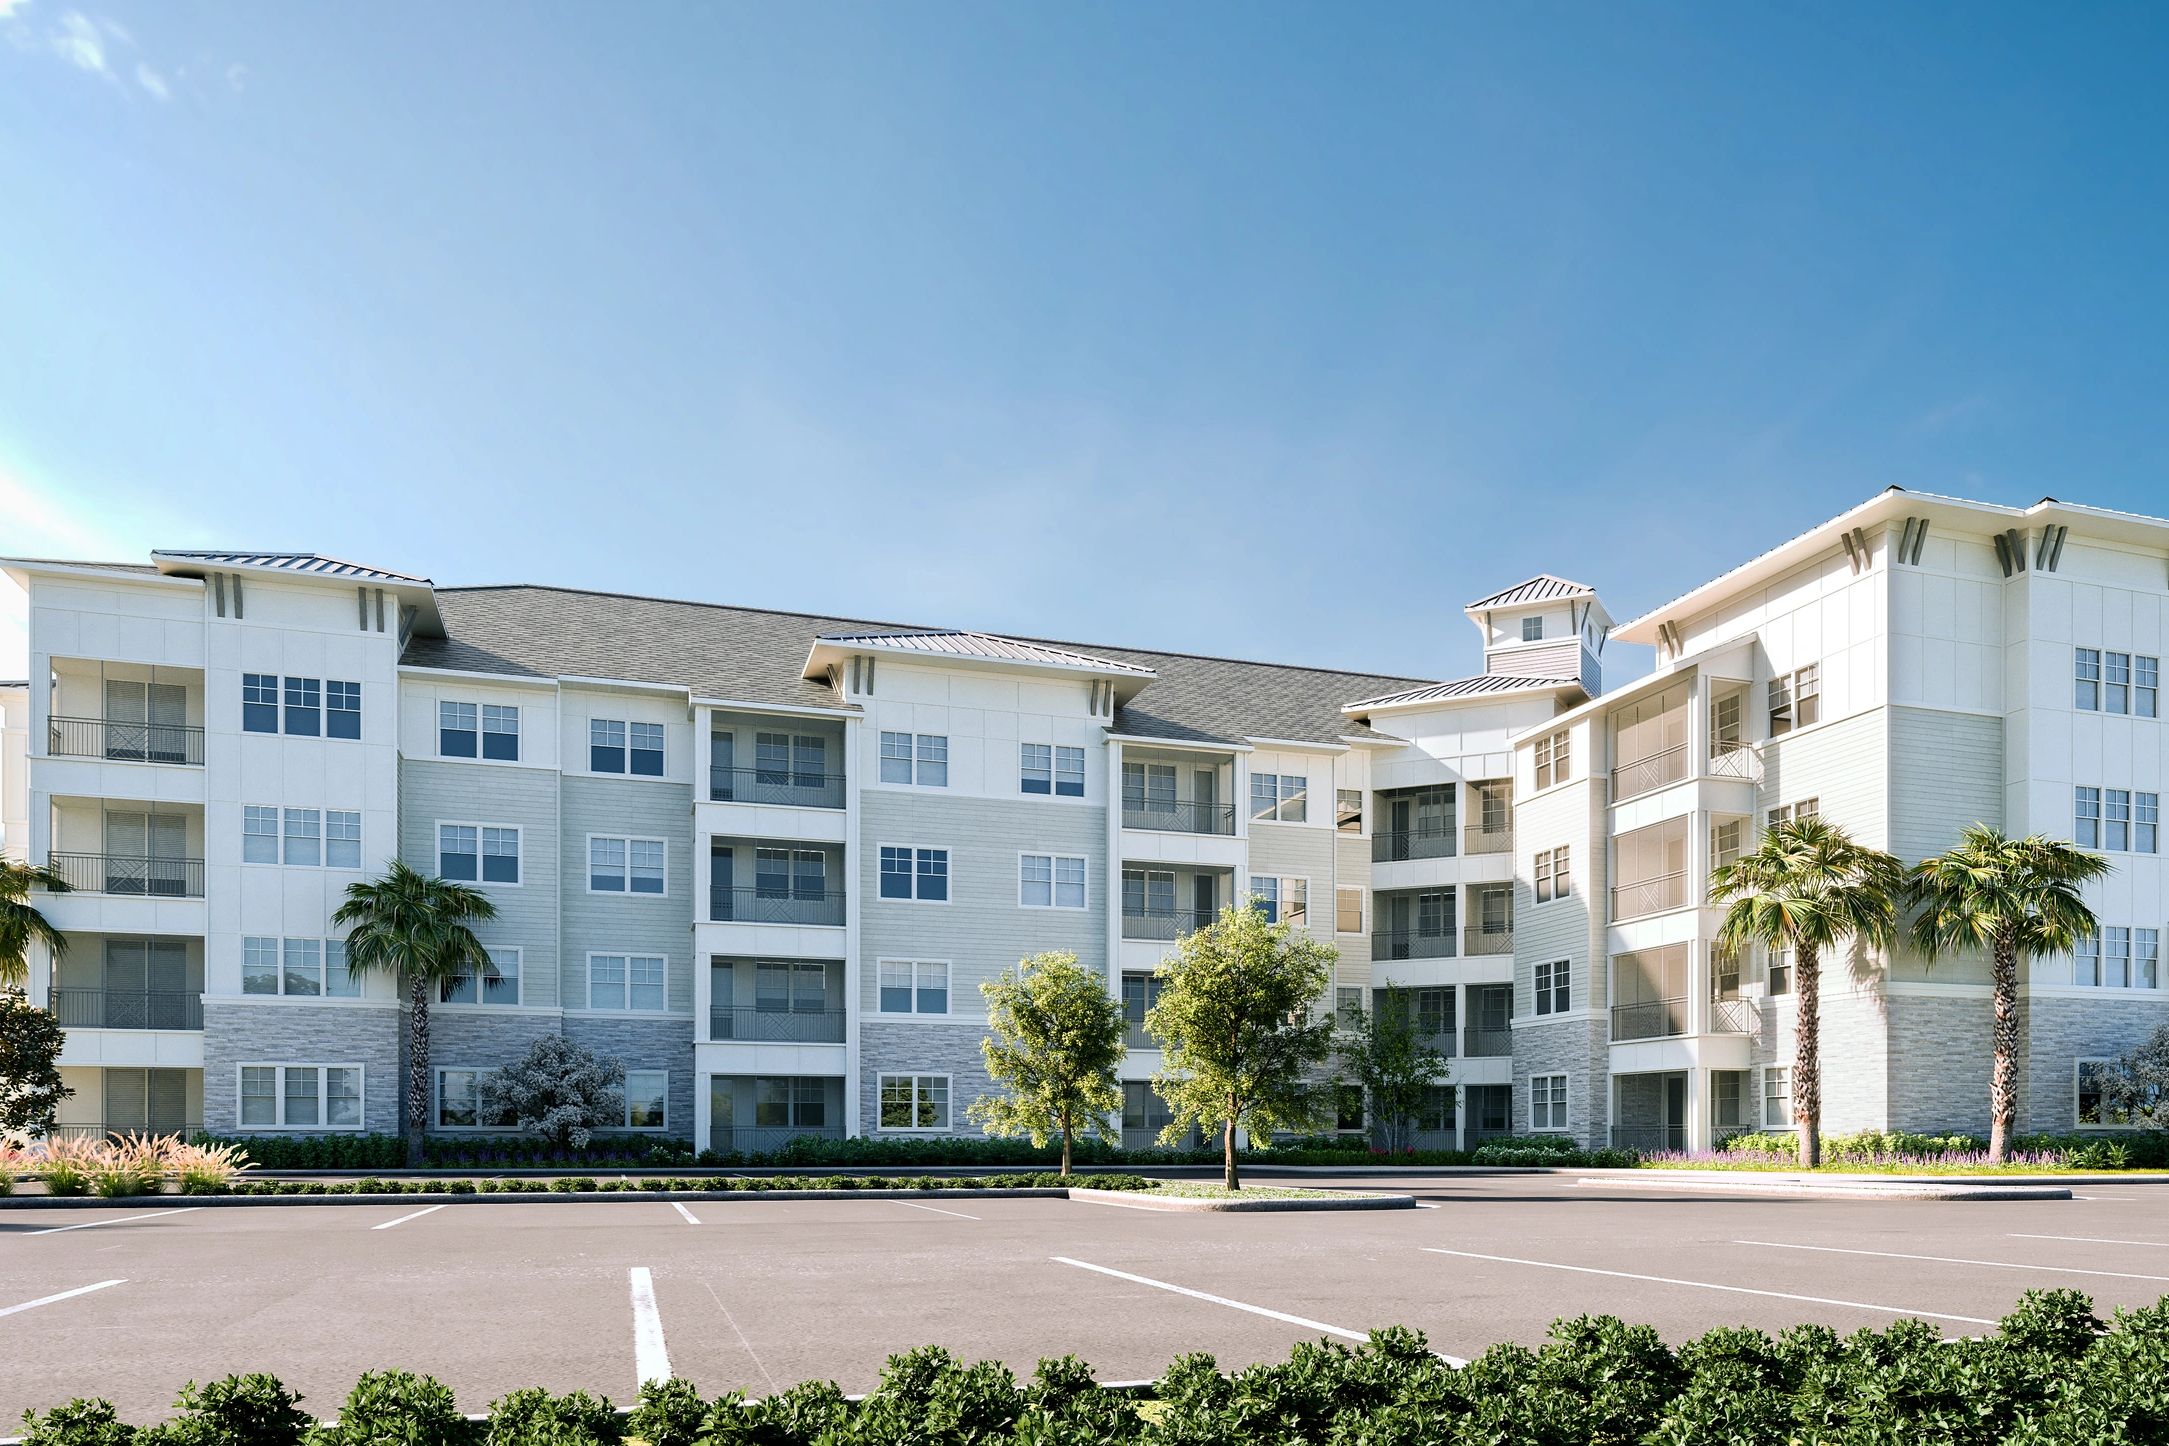 Preserve at Island Pointe apartments in Jacksonville, Florida